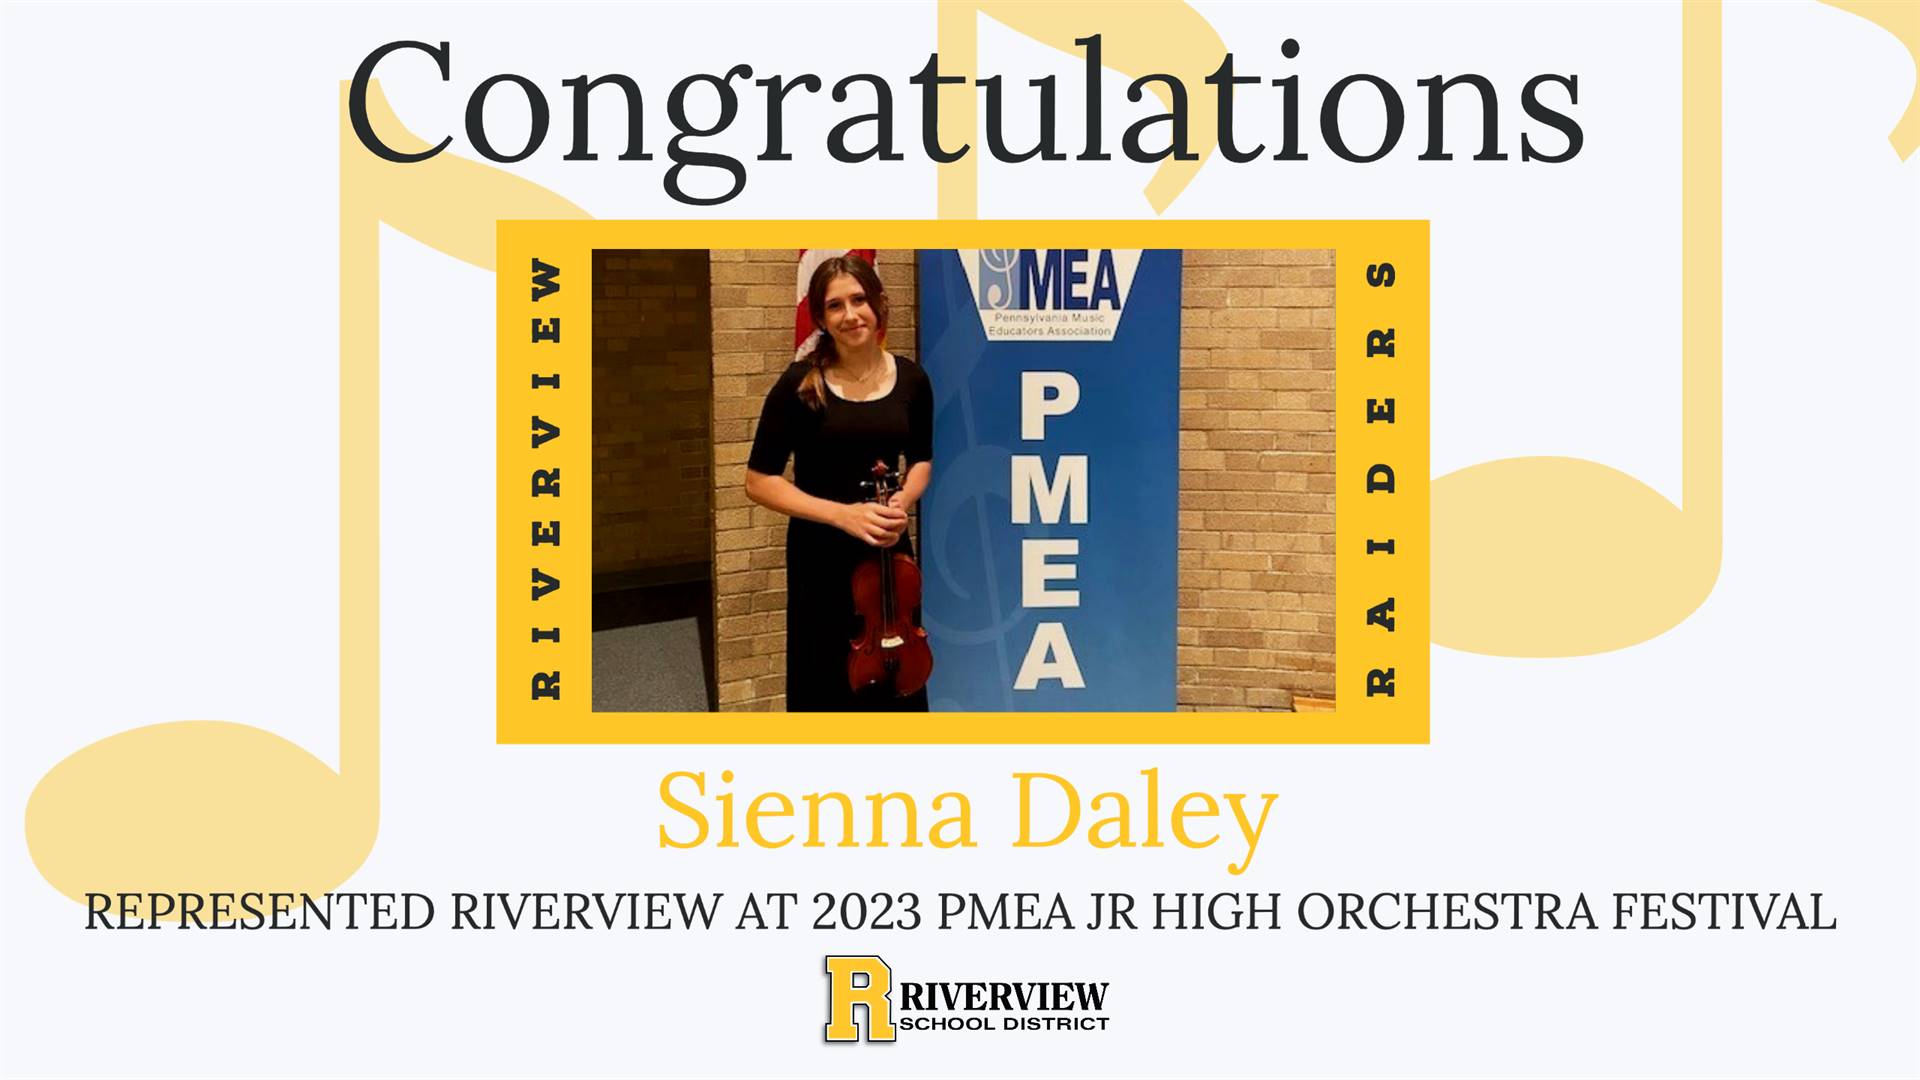 Congratulations to Sienna Daley, who represented Riverview at the 2023 PMEA Junior High Orchestra Fe